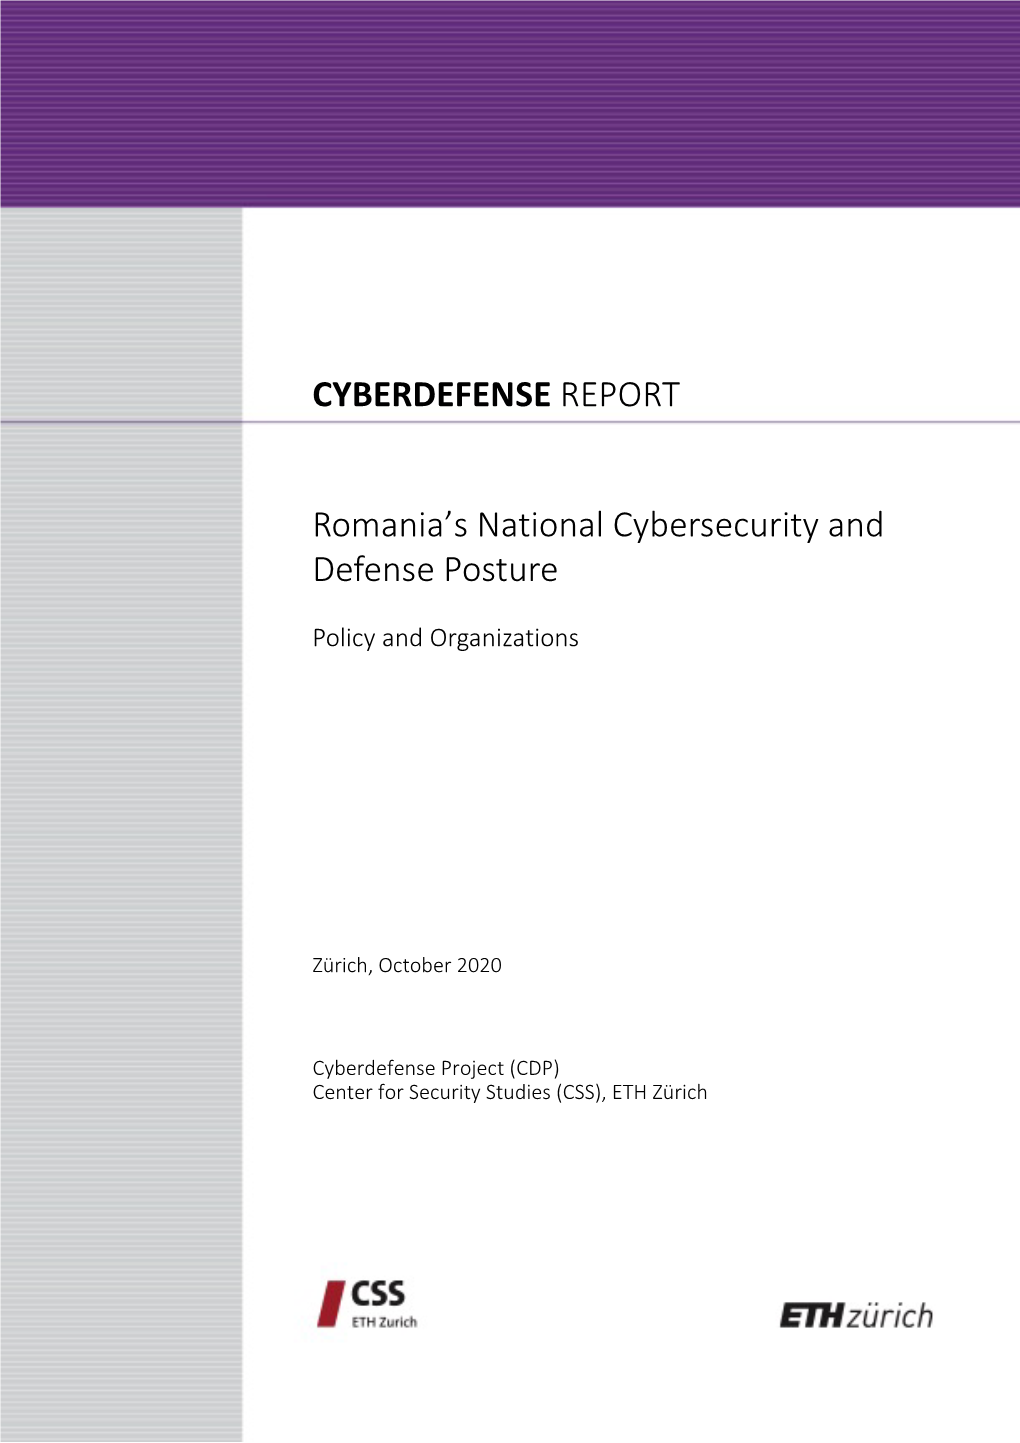 'Romania's National Cybersecurity and Defense Posture'